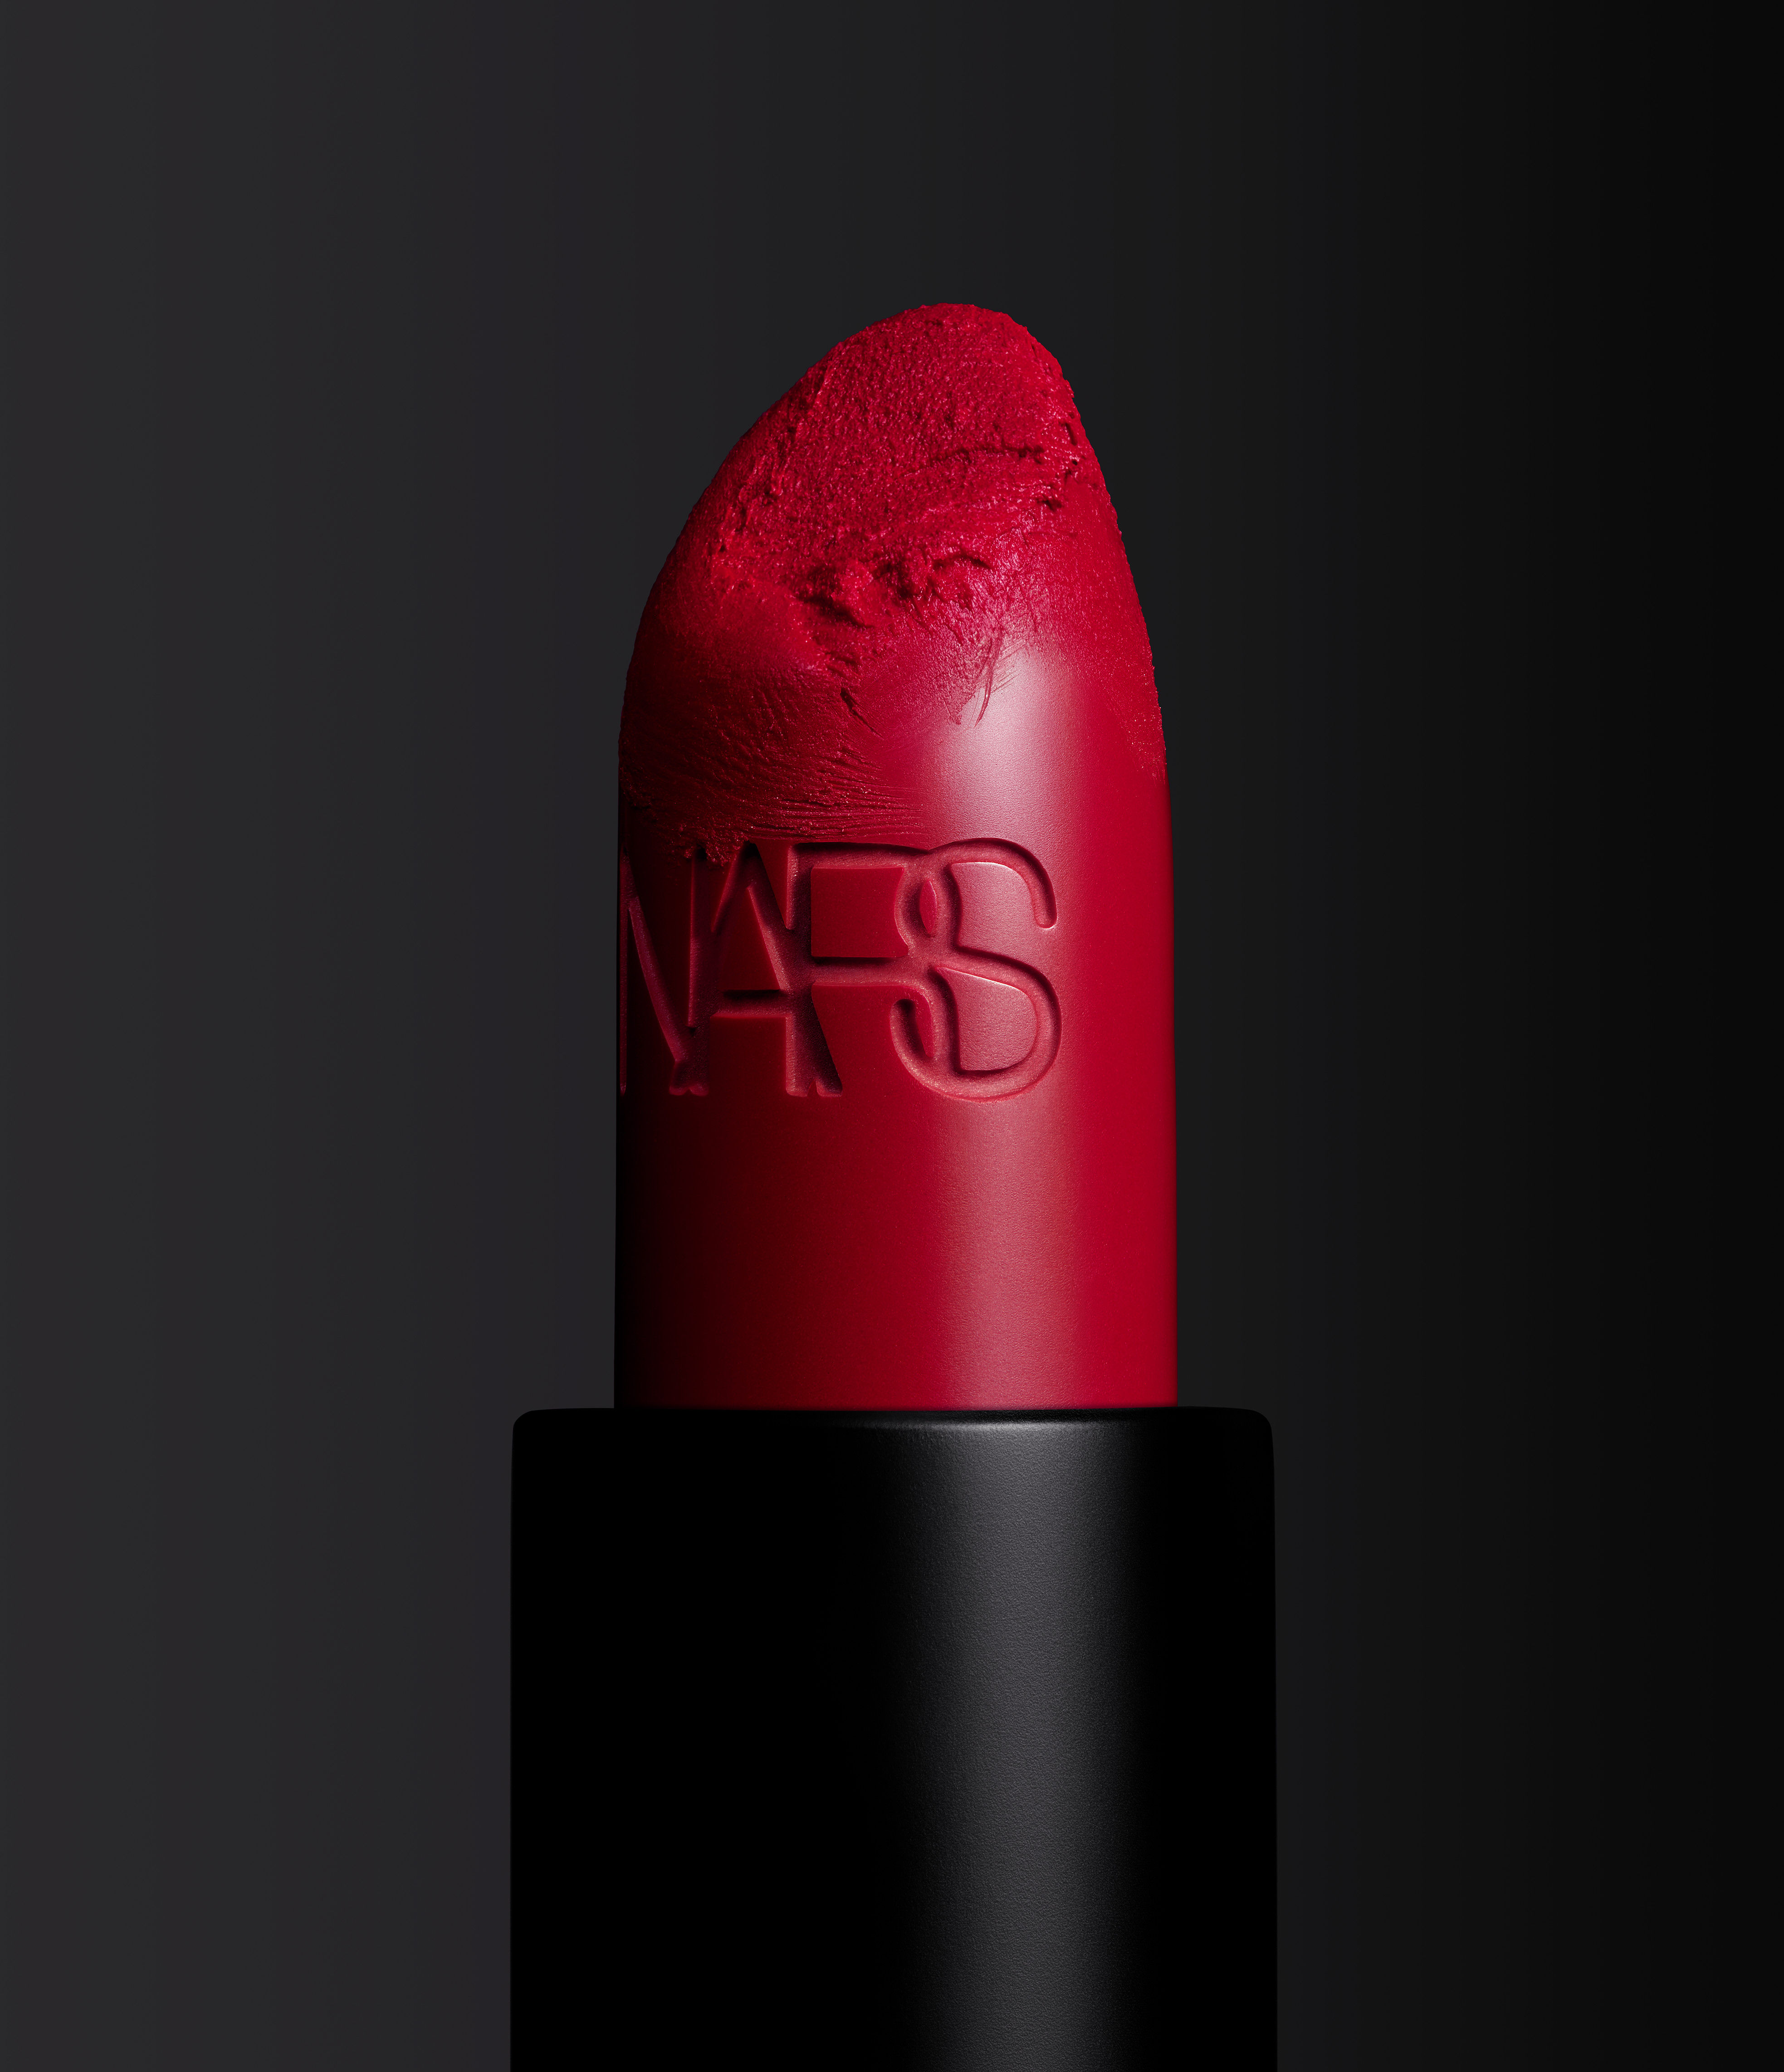 NARS Iconic Lipstick Inappropriate Red Stylized Image (2)